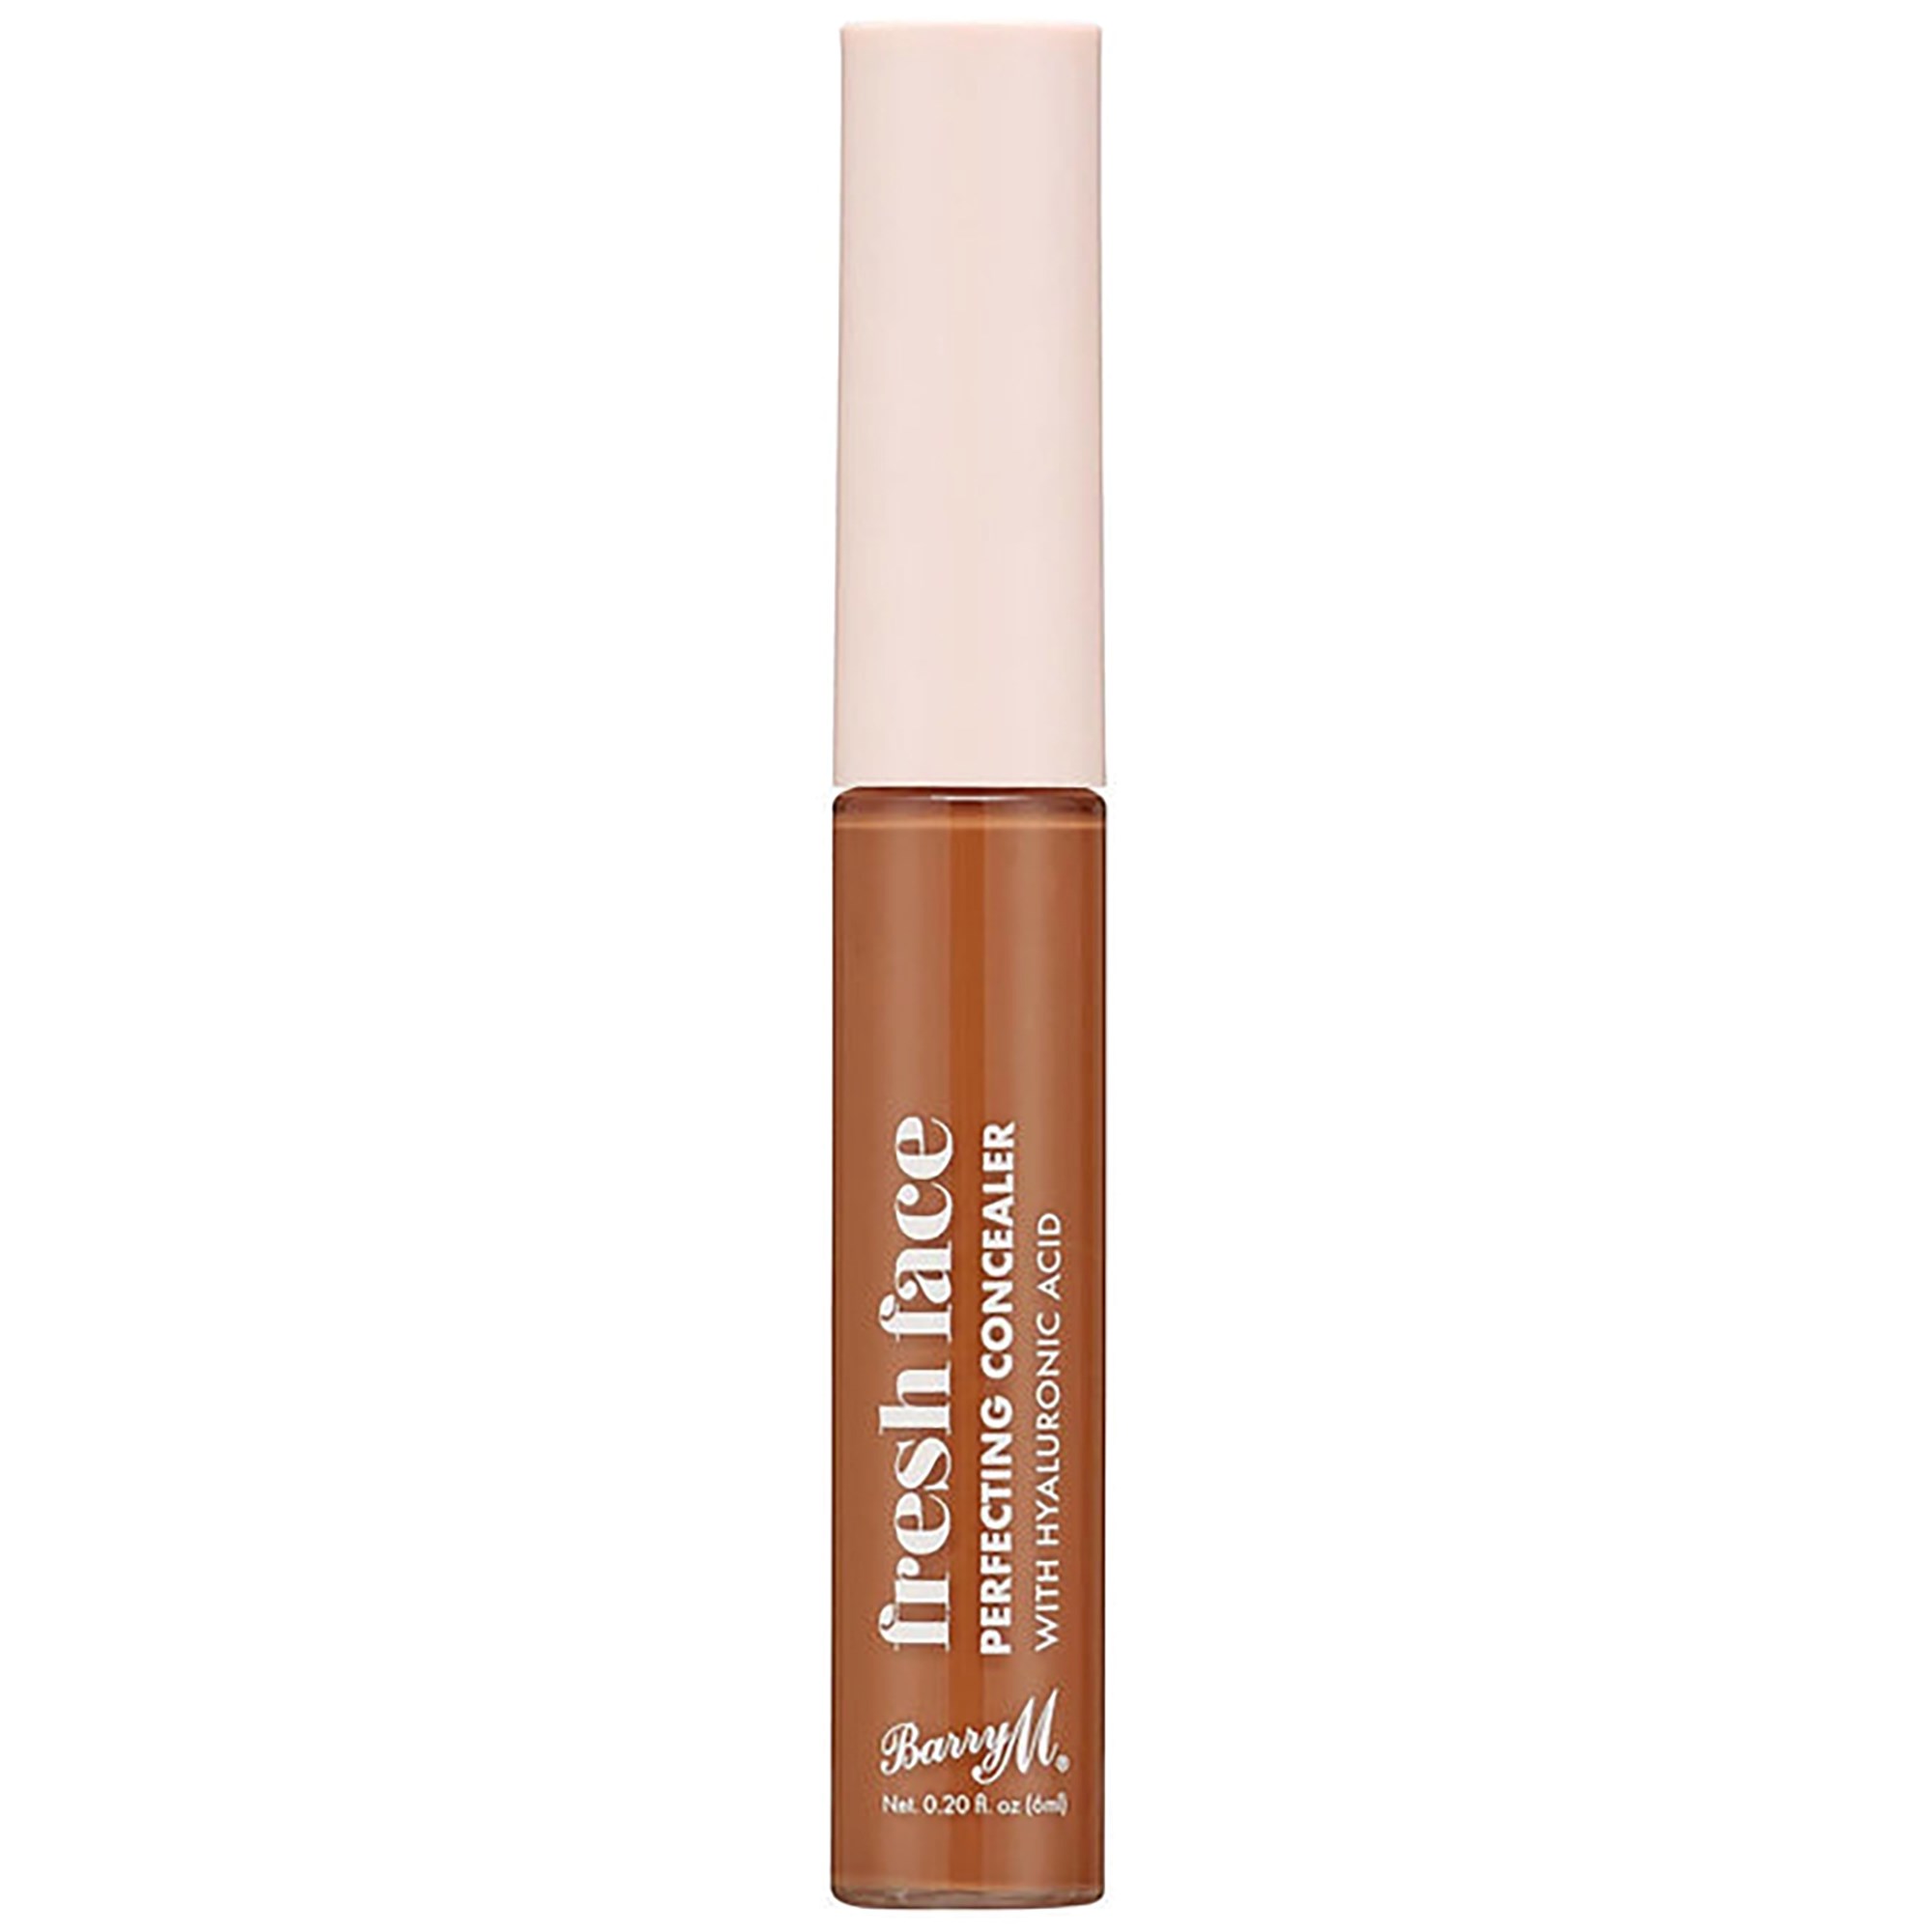 Barry M Fresh Face Perfecting Concealer 16